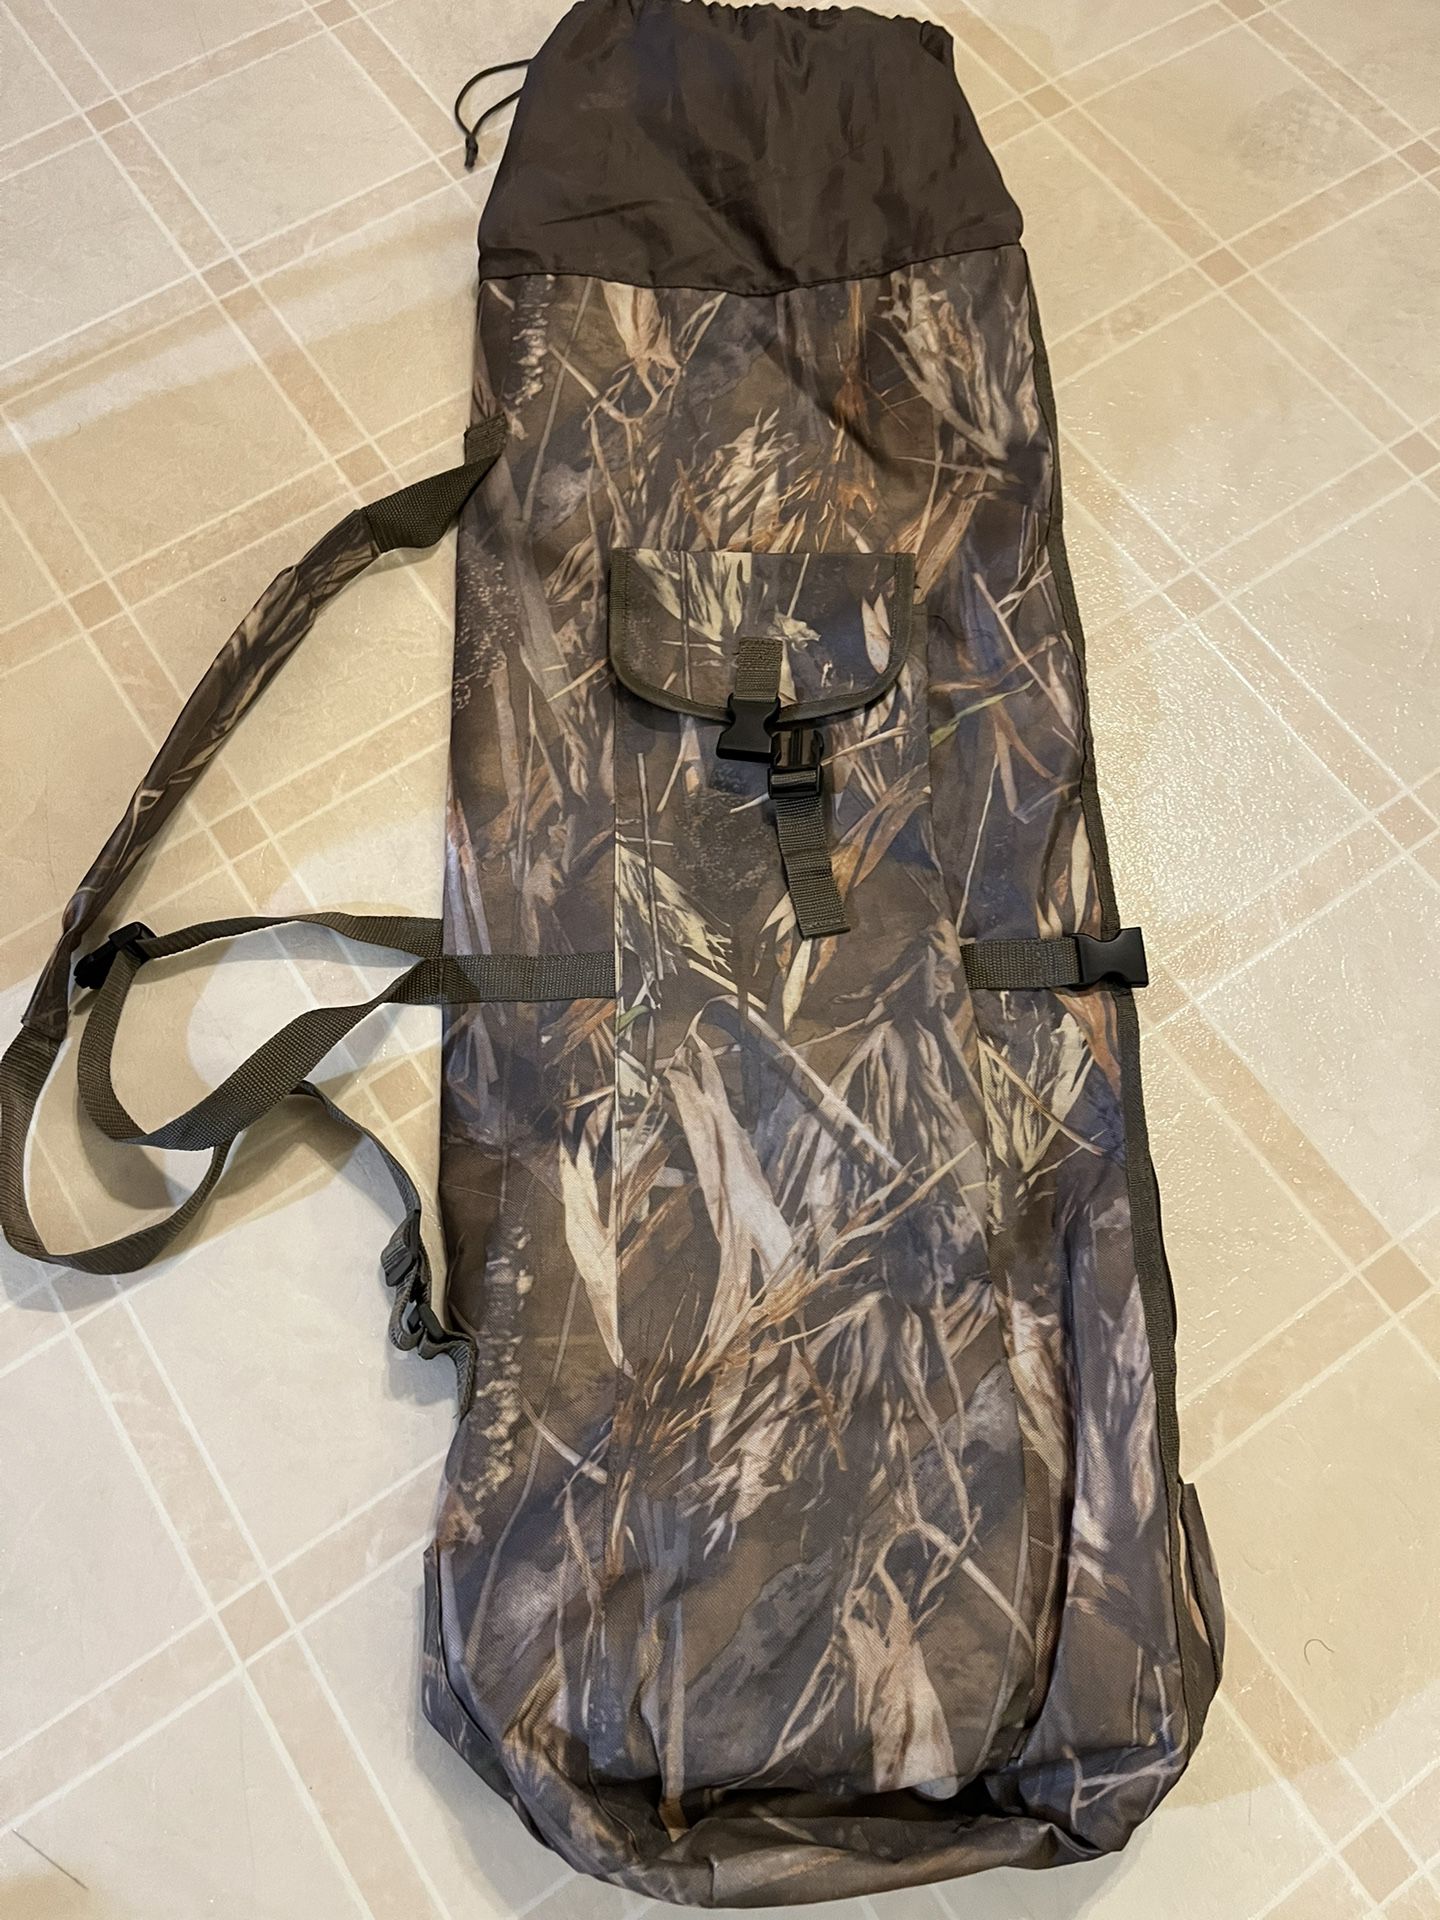 Wowelife Fishing Rod Carrier Fishing Reel Organizer Pole Storage Bag for  Fishing and Traveling for Sale in Castro Valley, CA - OfferUp